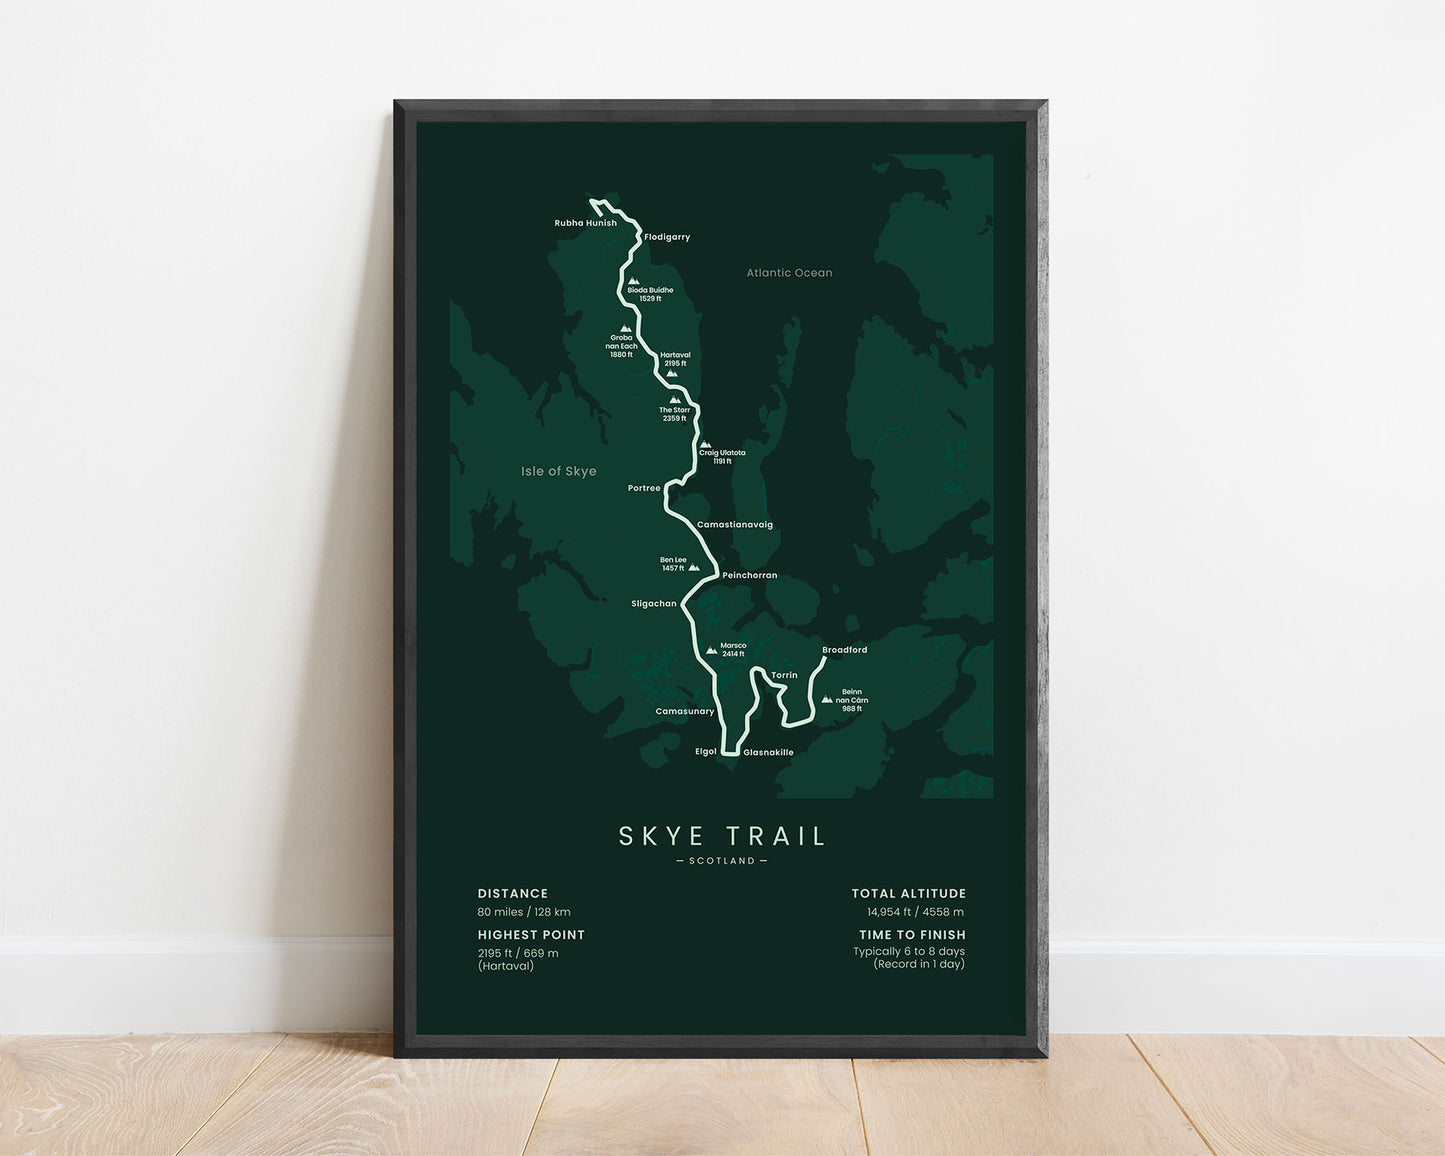 Skye Trail (United Kingdom) route print with green background